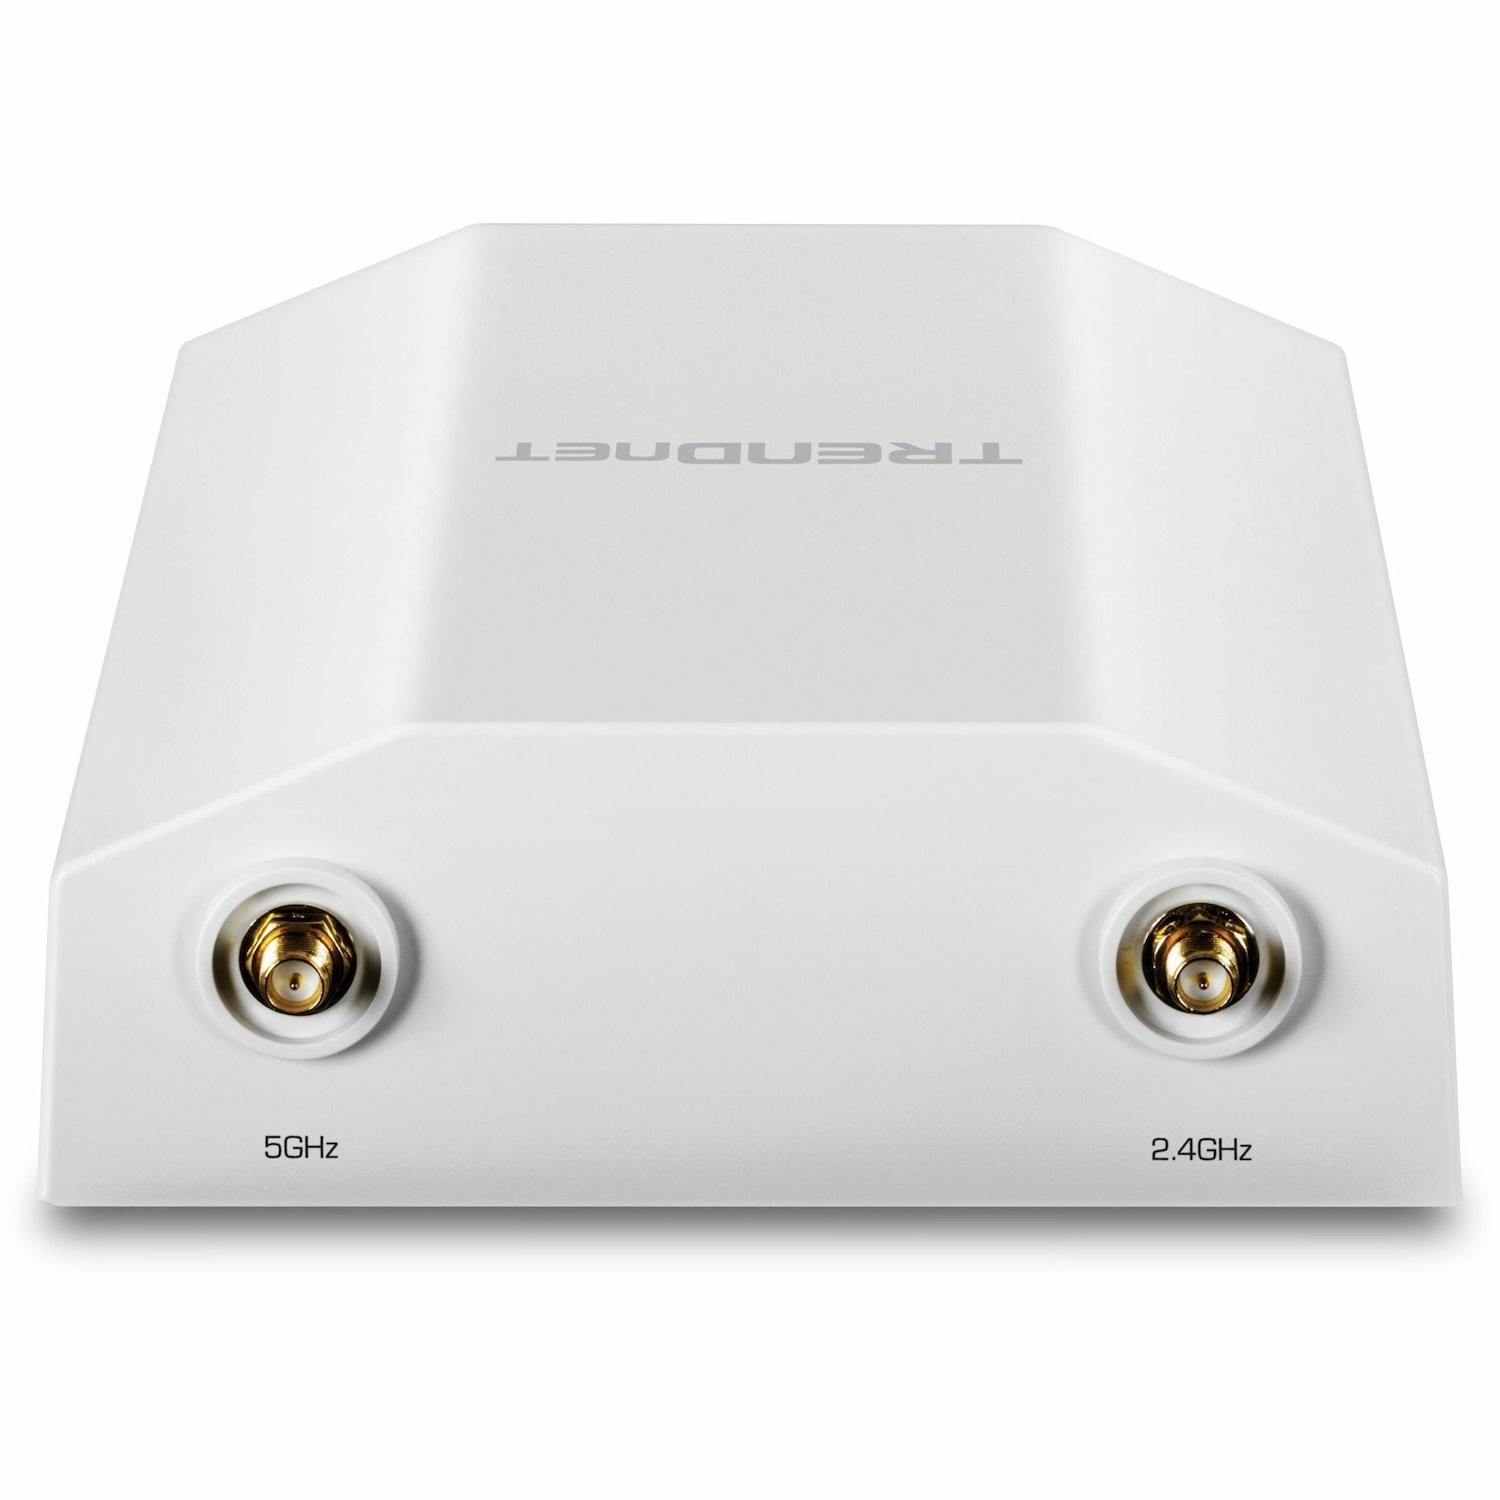 TRENDnet 5 dBi WiFi 6 AX1800 Outdoor PoE+ Omni Directional Access Point, TEW-941APBO, Point-to-Point and Point-to-Multi-Point Bridge, IP67 Weather Rated Housing, PoE+ Powered, White